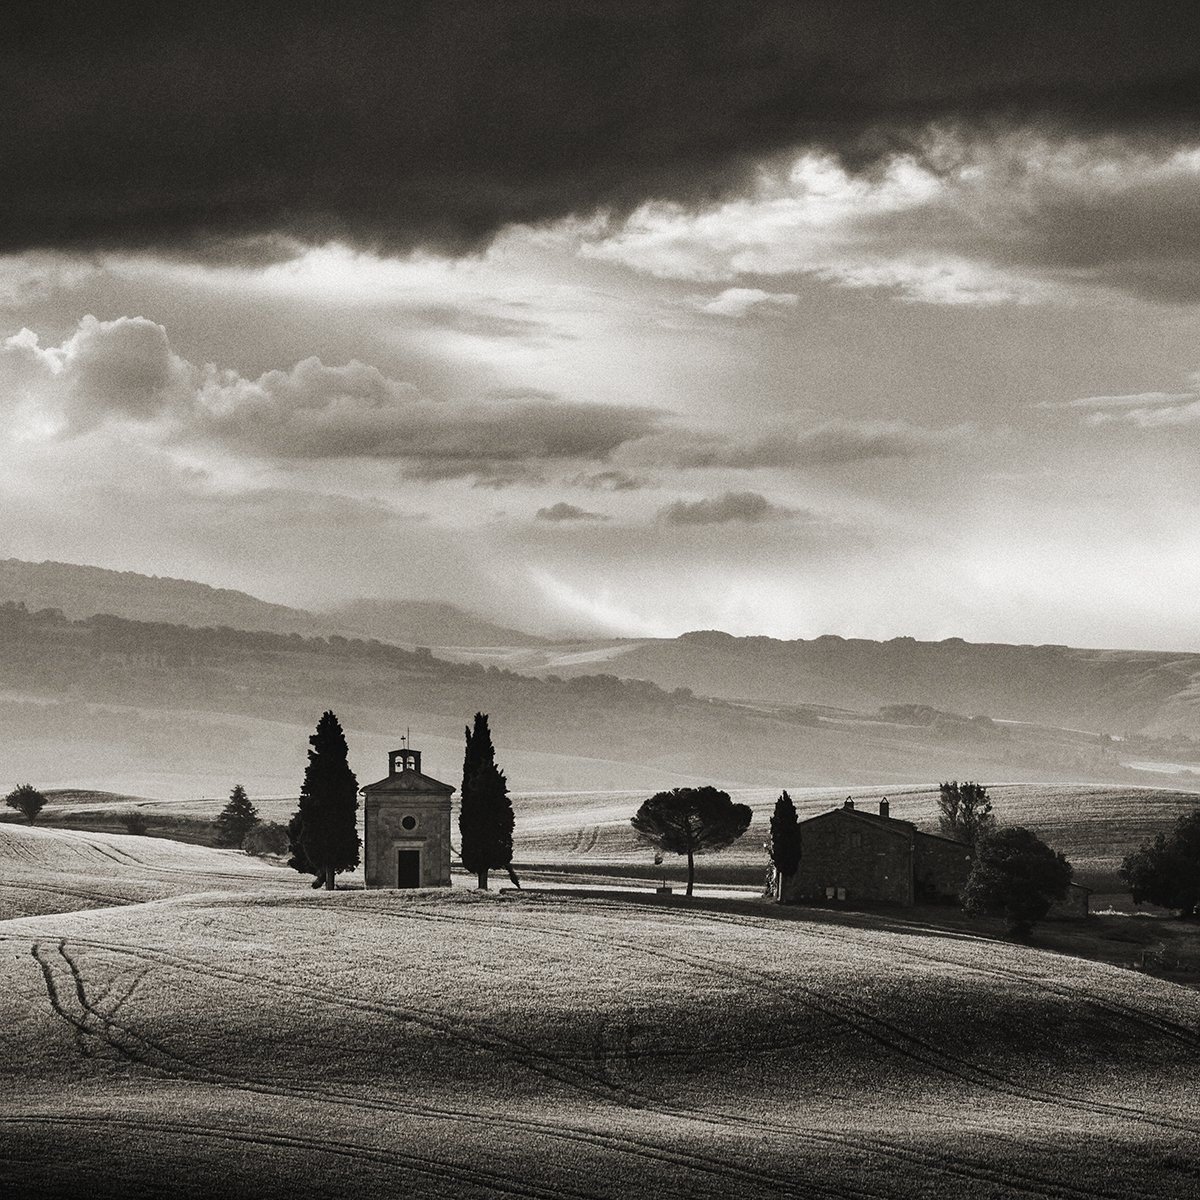 Chapel in Tuscany - Limited edition 1 of 5 by Peter Zelei